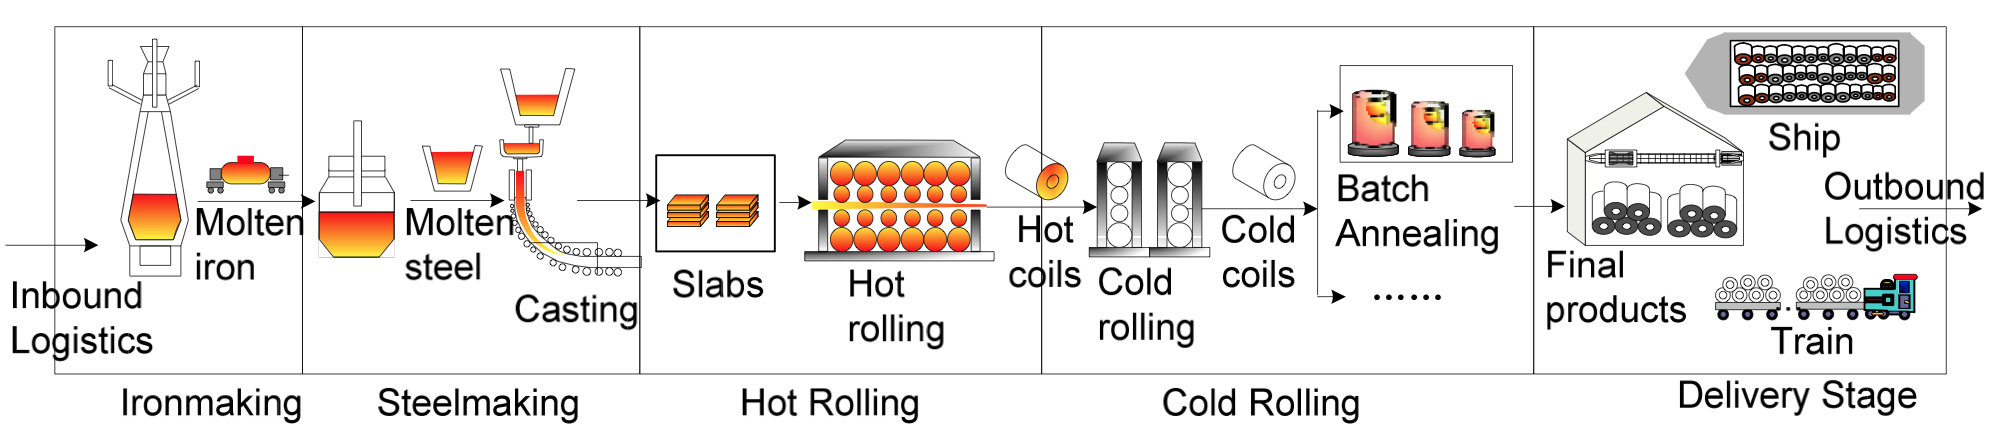 Figure 1. Stages of steel production and logistics system